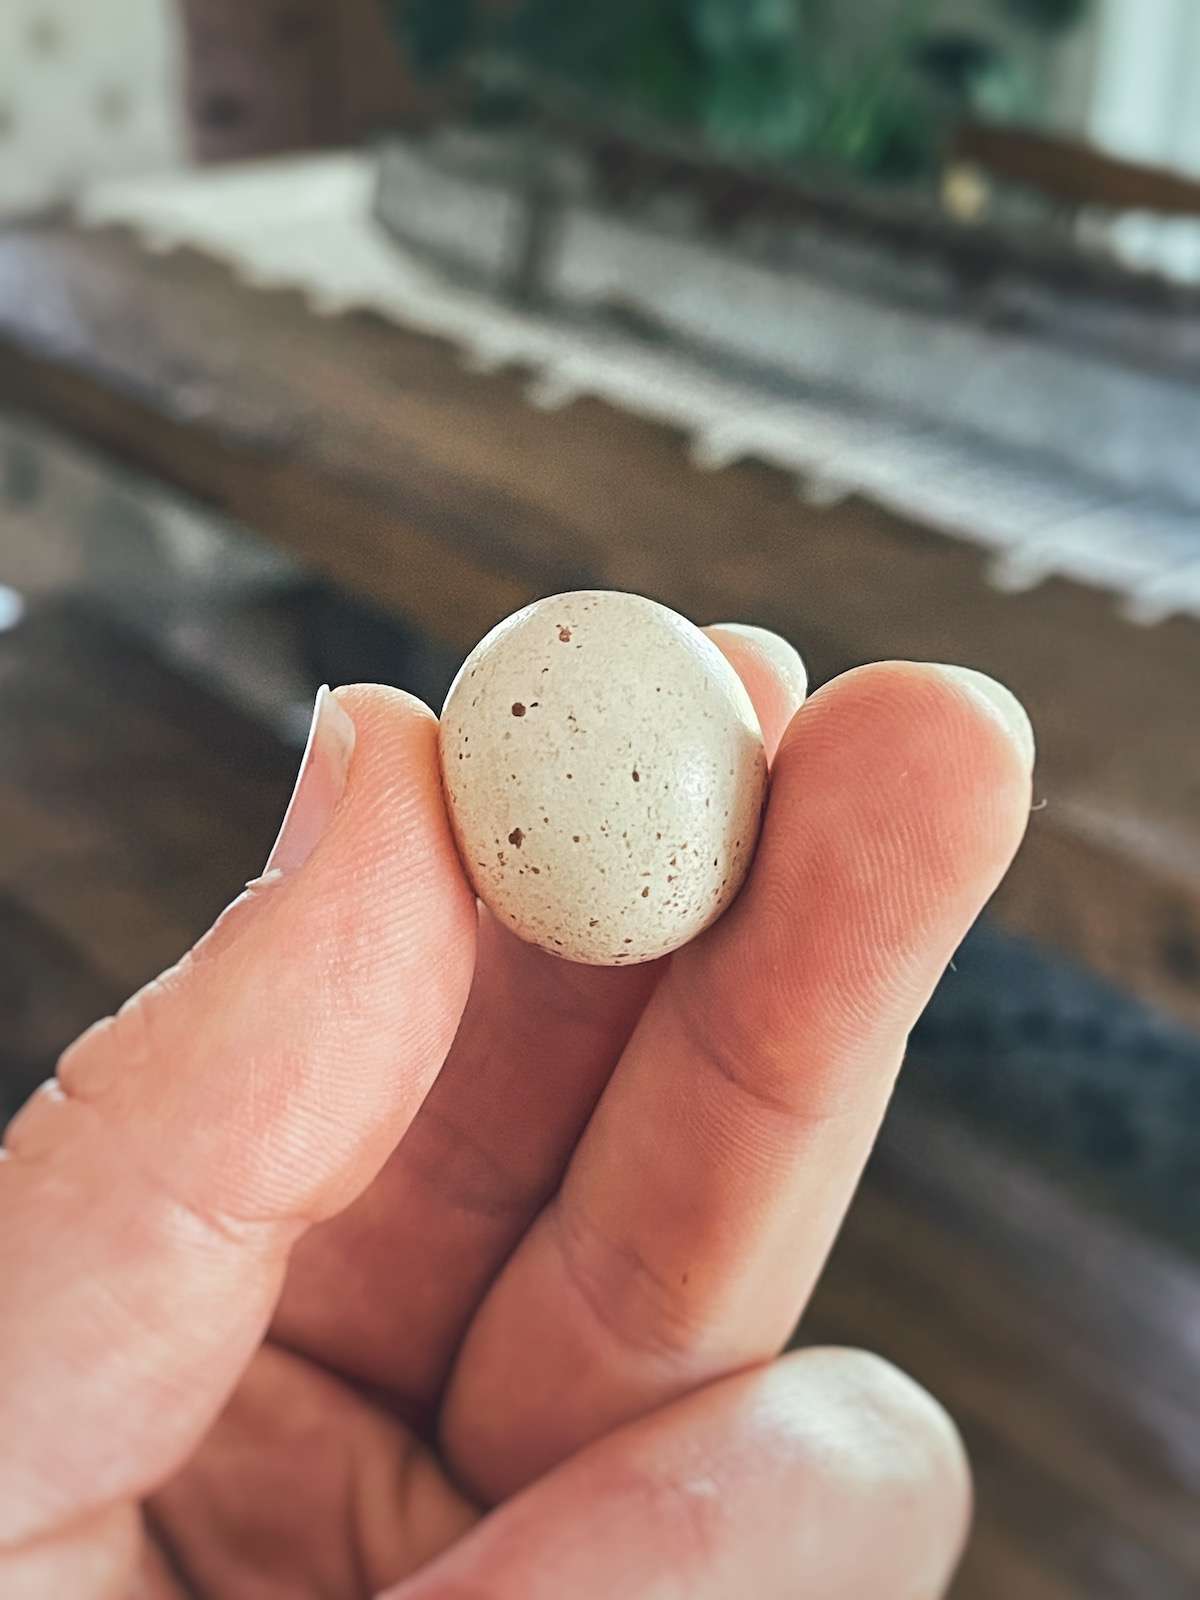 Holding a fairy egg between 3 fingers in front of a wooden table